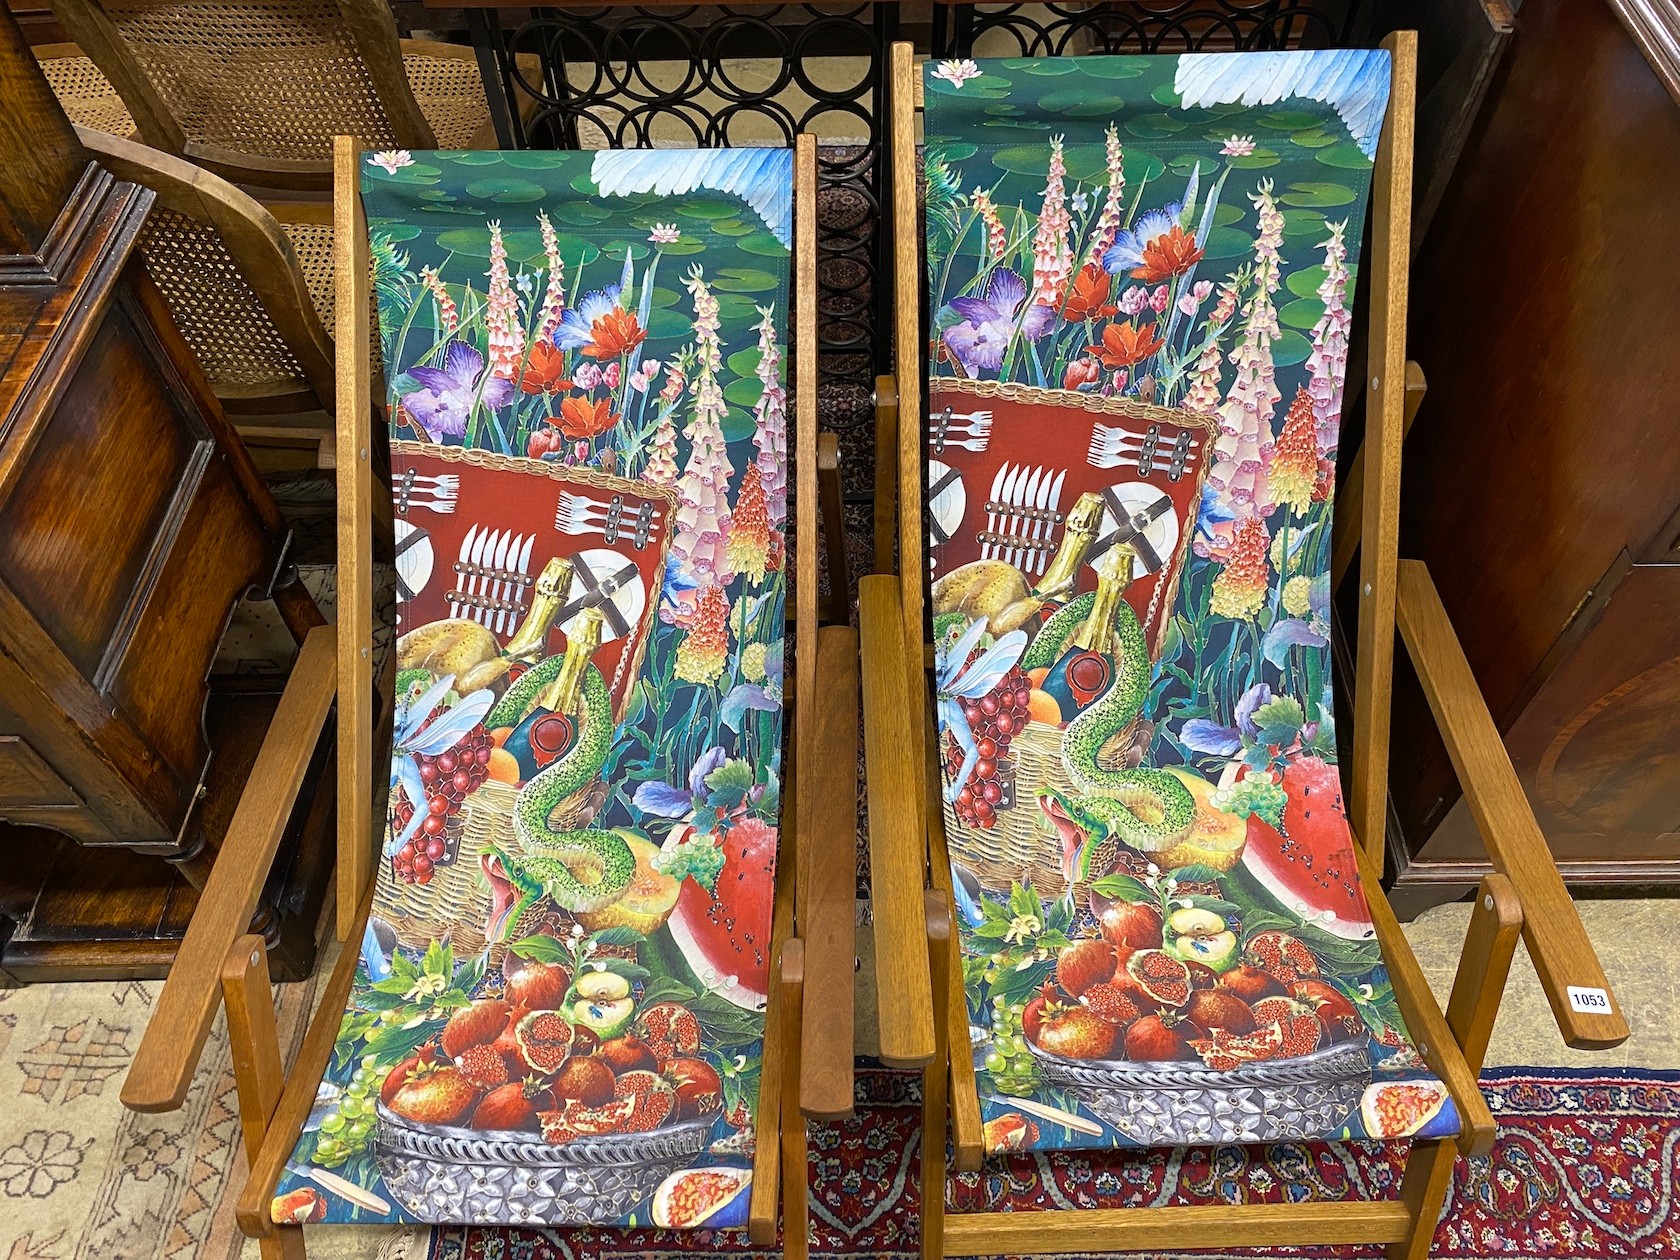 A pair of modern teak framed deck chairs with printed fabric panels